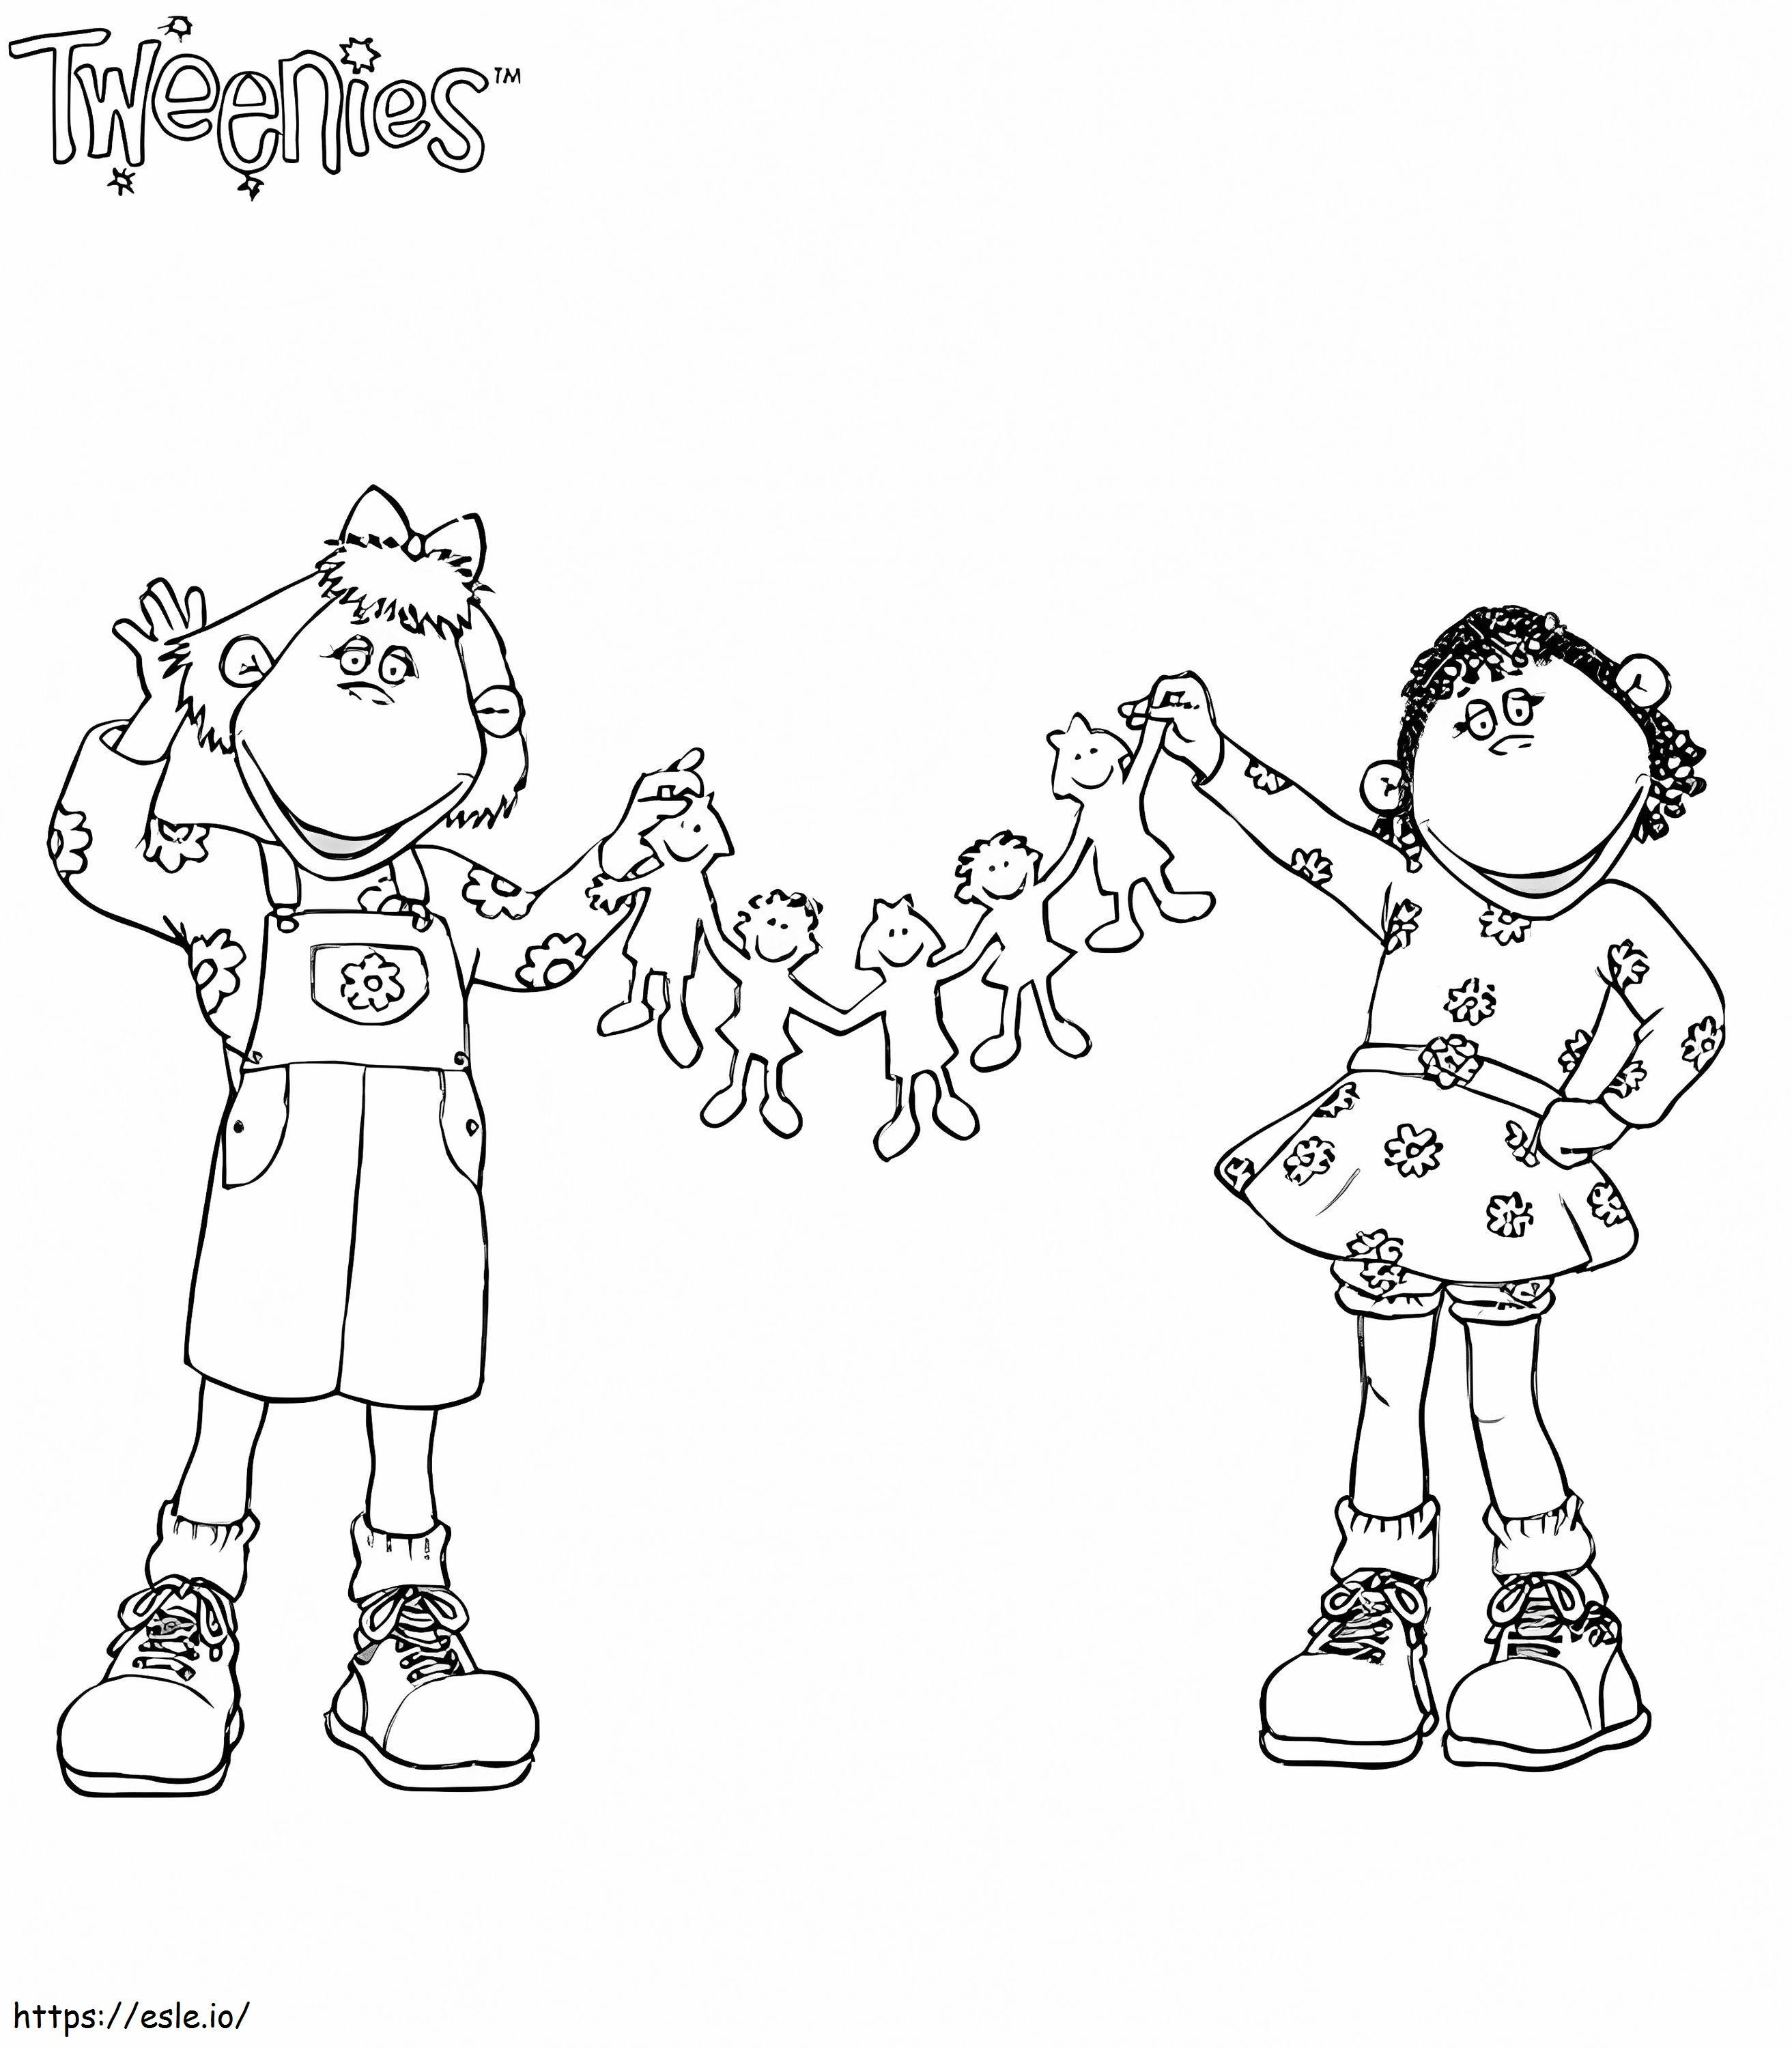 Fizz And Bella coloring page